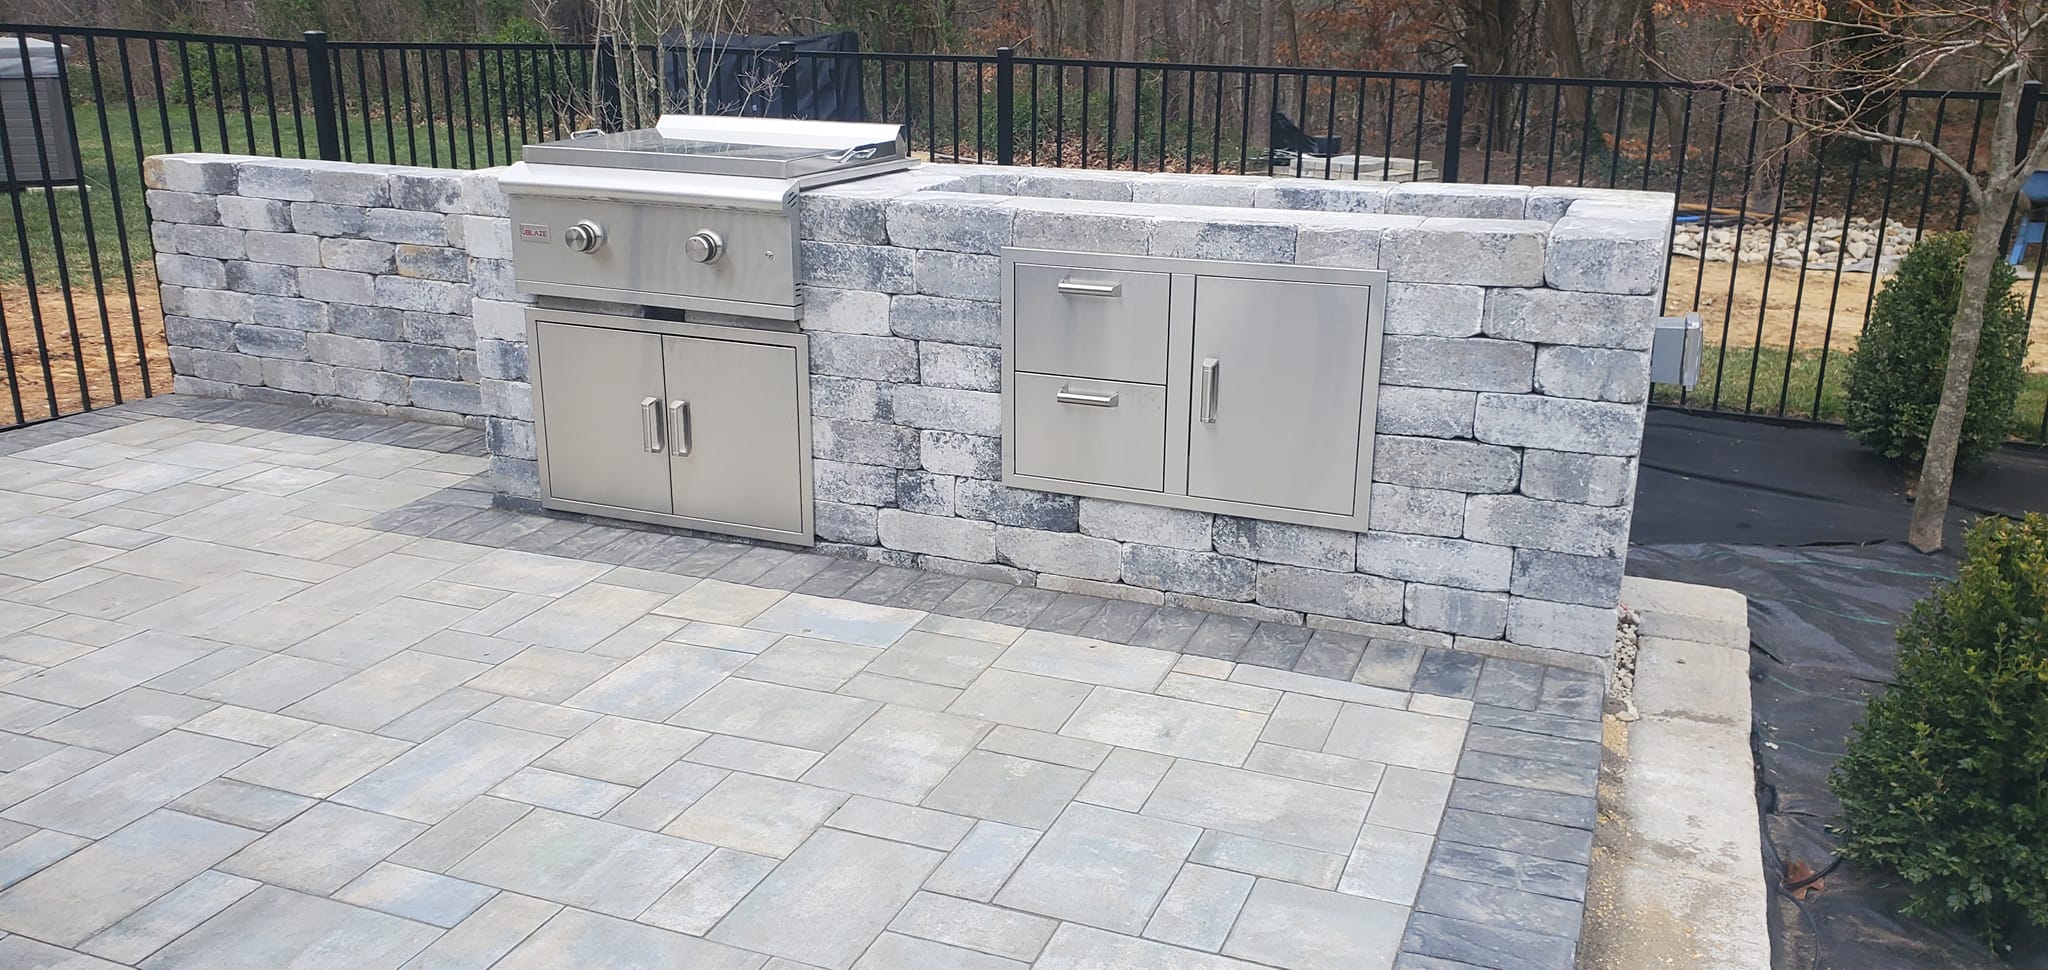 Adam's Lawn & Landscaping Harwood Maryland Paver Patio Kitchen